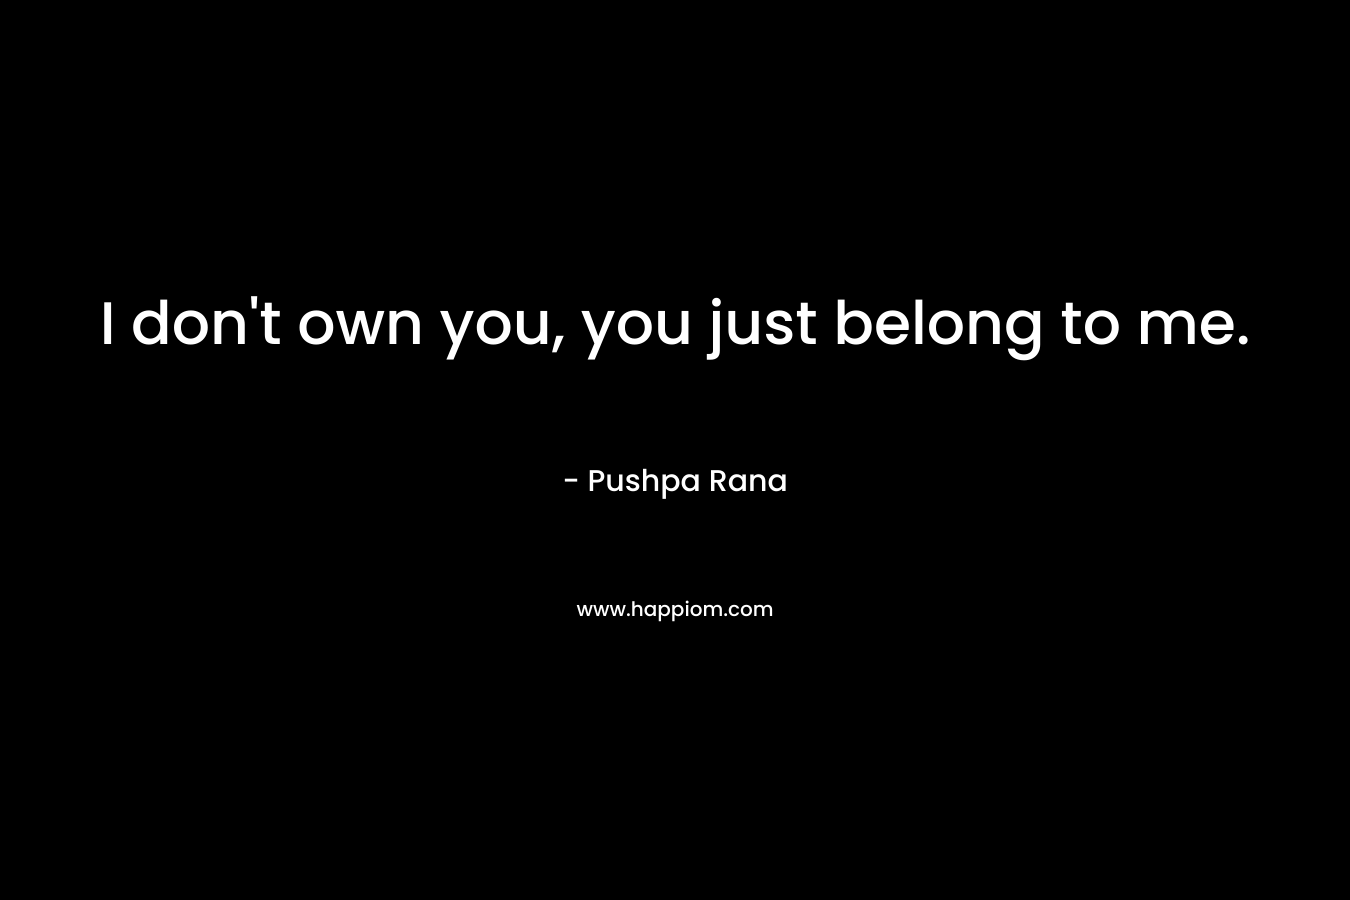 I don’t own you, you just belong to me. – Pushpa Rana